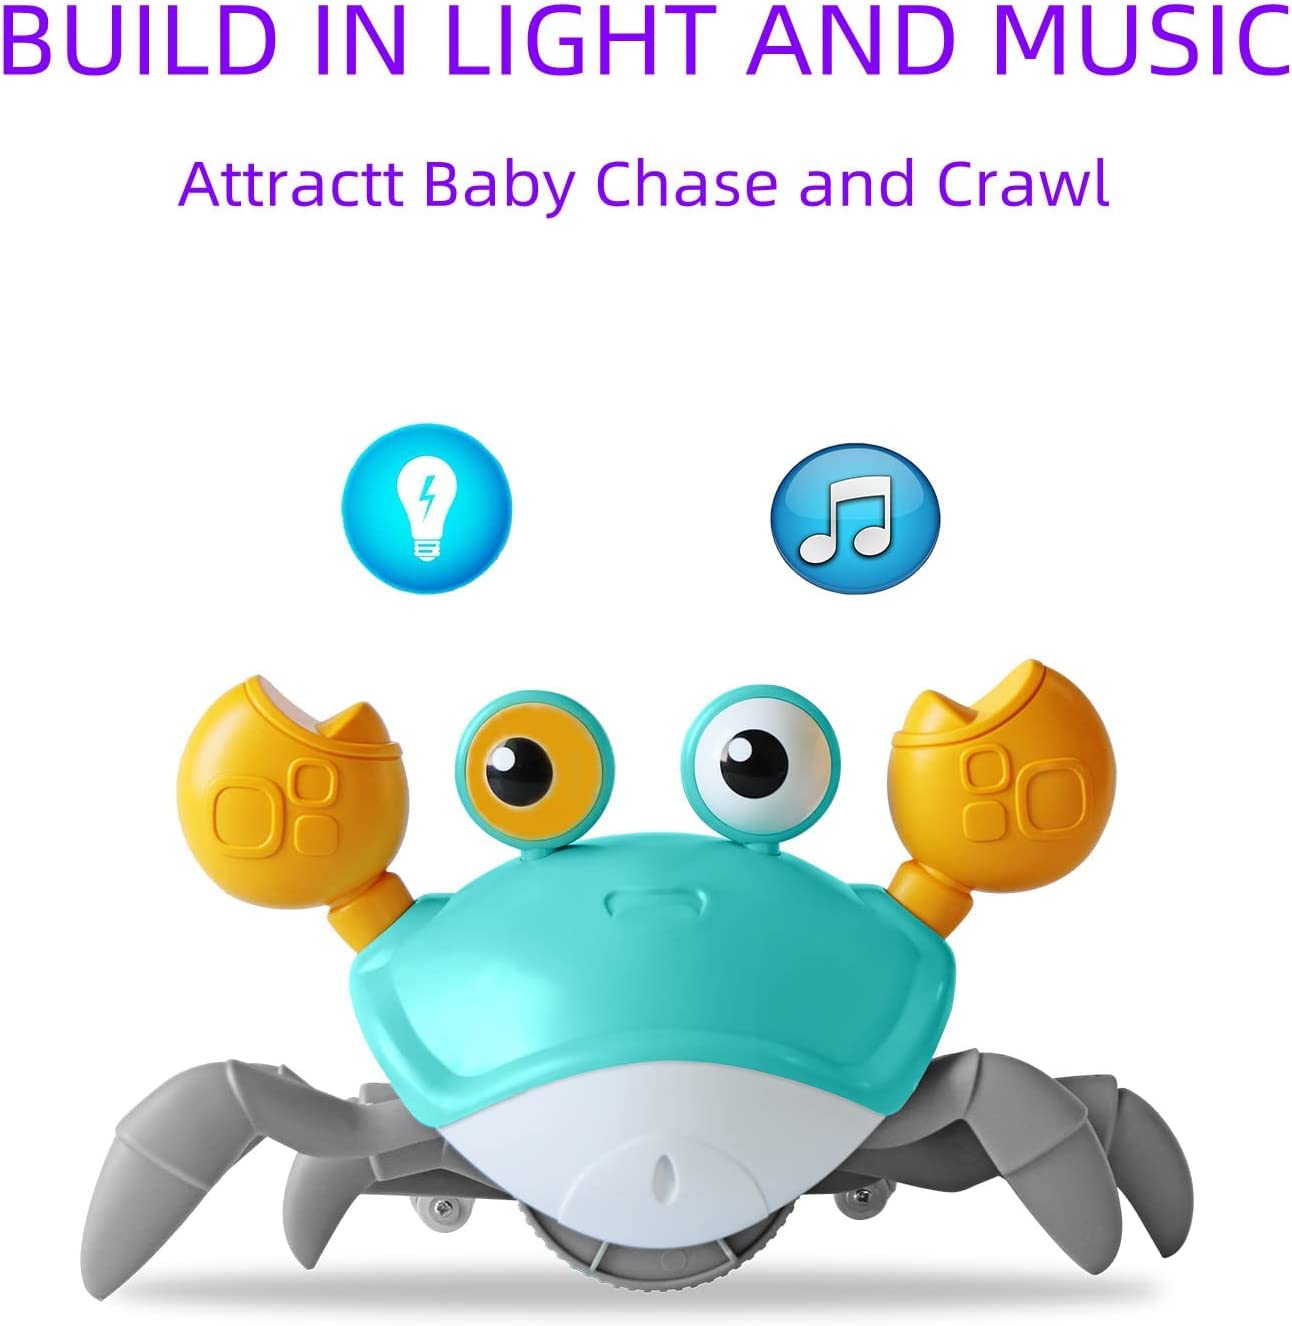 Crab Plush Toy, Crab Bath Toy, Crab Baby Toy with Music and LED Lights